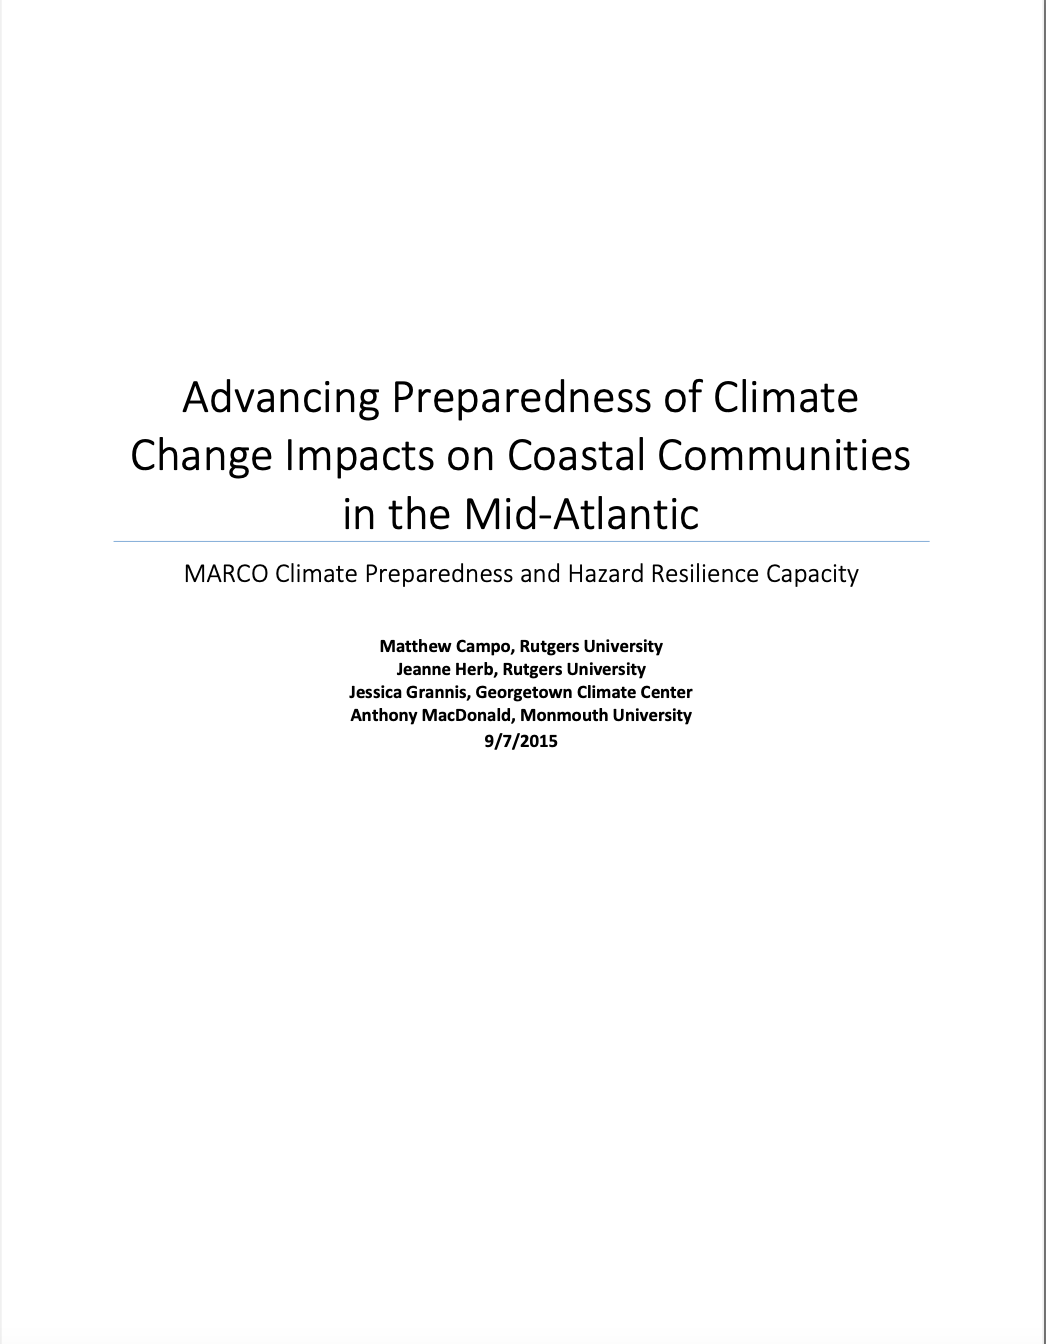 Advancing Preparedness of Climate Change Impacts on Coastal Communities in the Mid-Atlantic: MARCO Climate Preparedness and Hazard Resilience Capacity